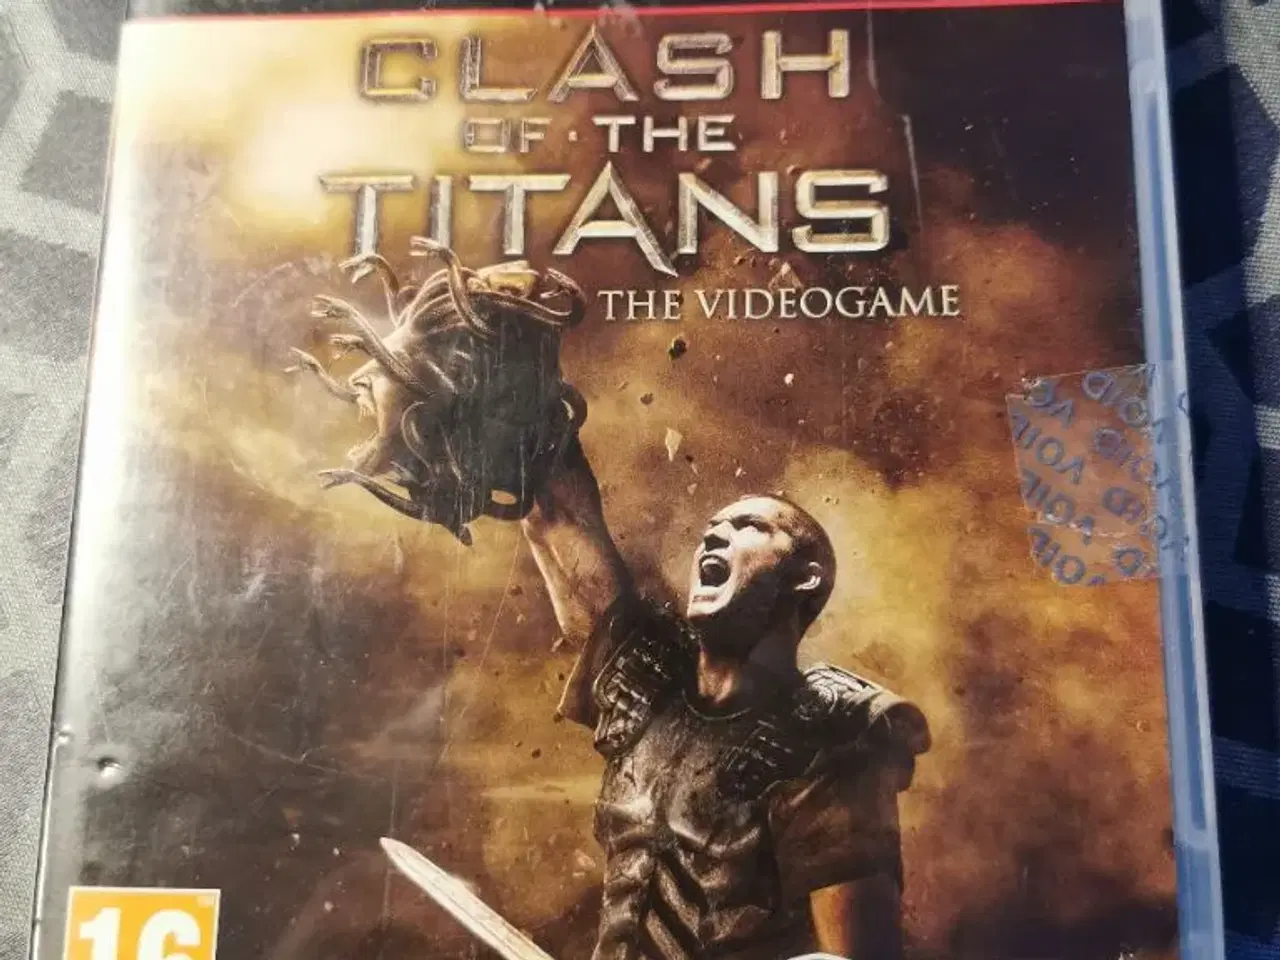 Billede 1 - Clash of the titans - The videogame.